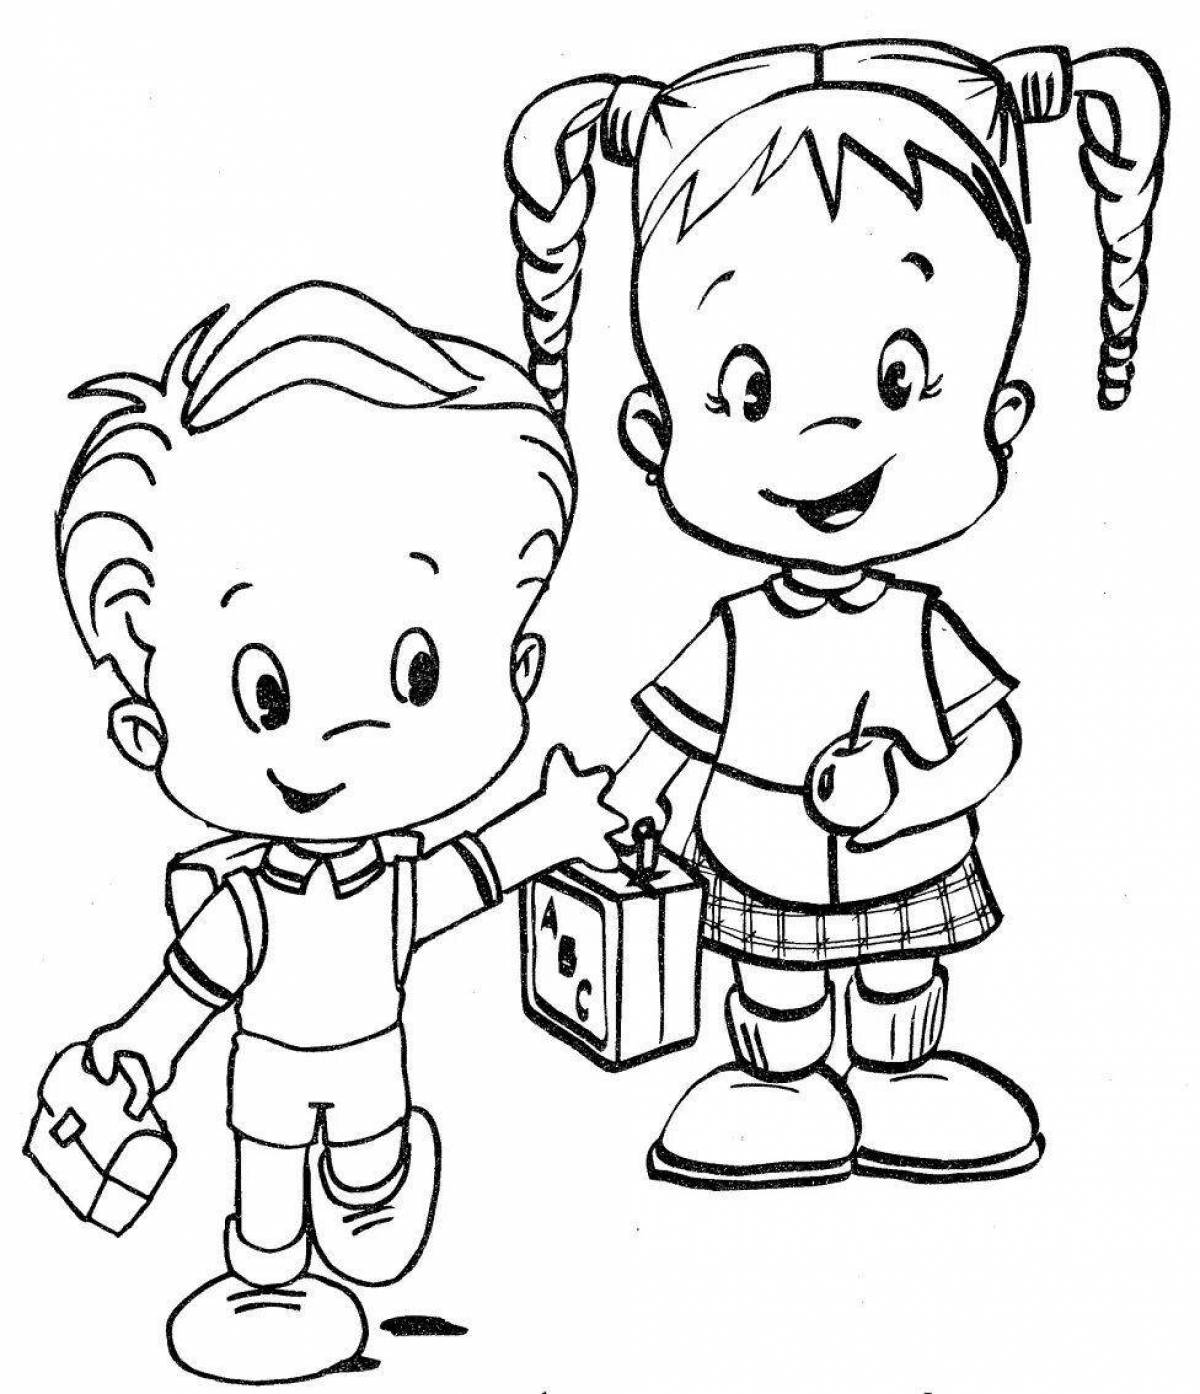 Happy me and my friends coloring page